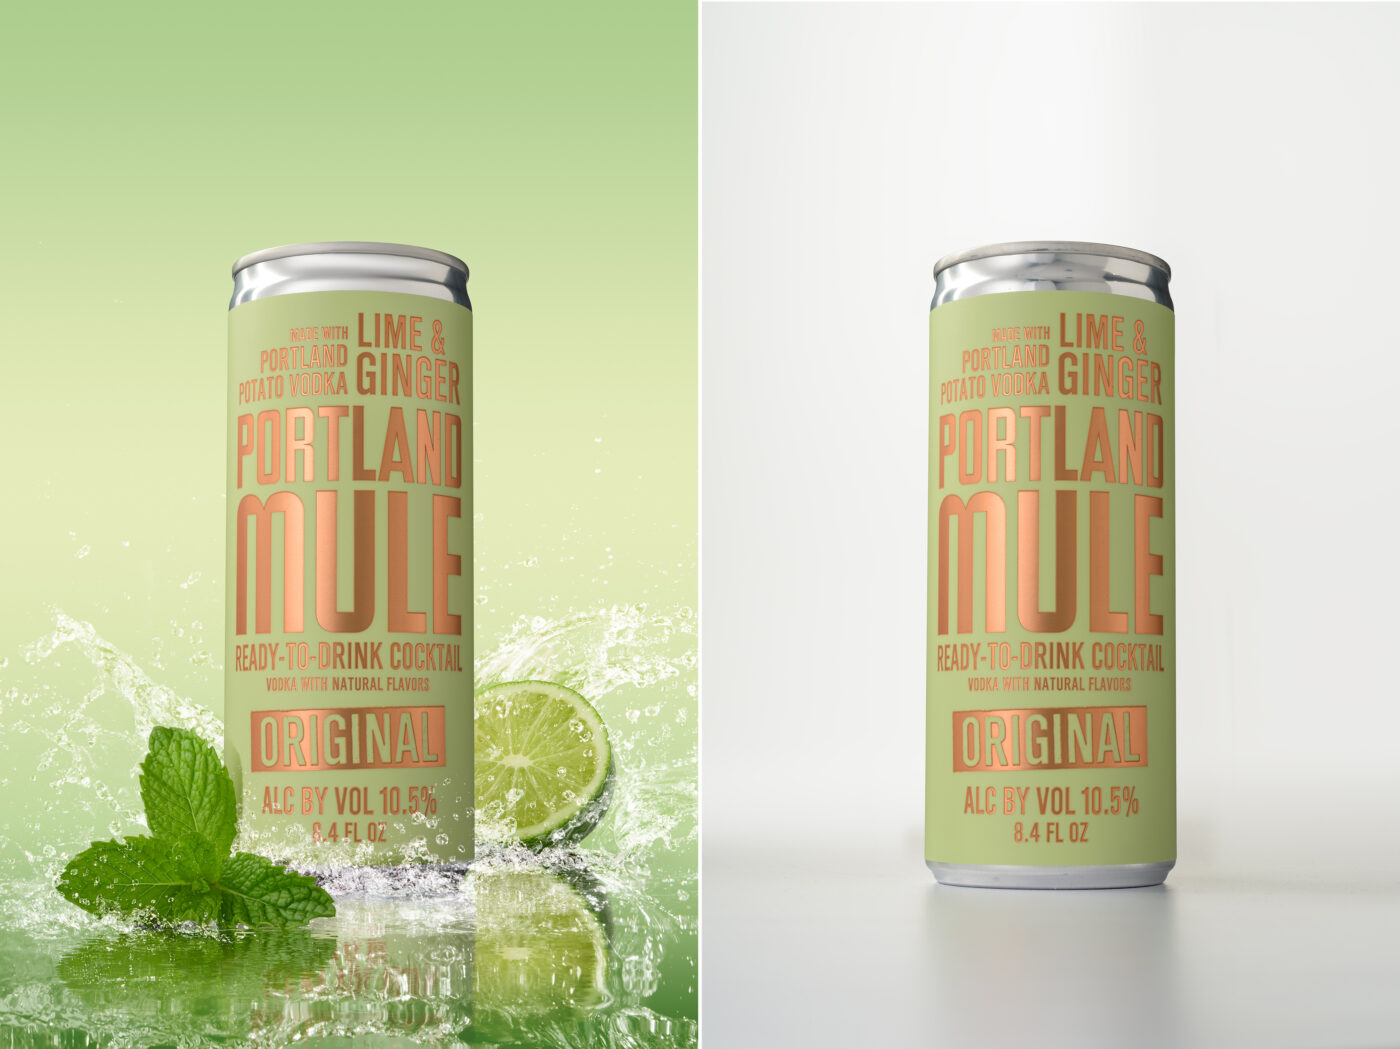 After and Before - Portland Mule